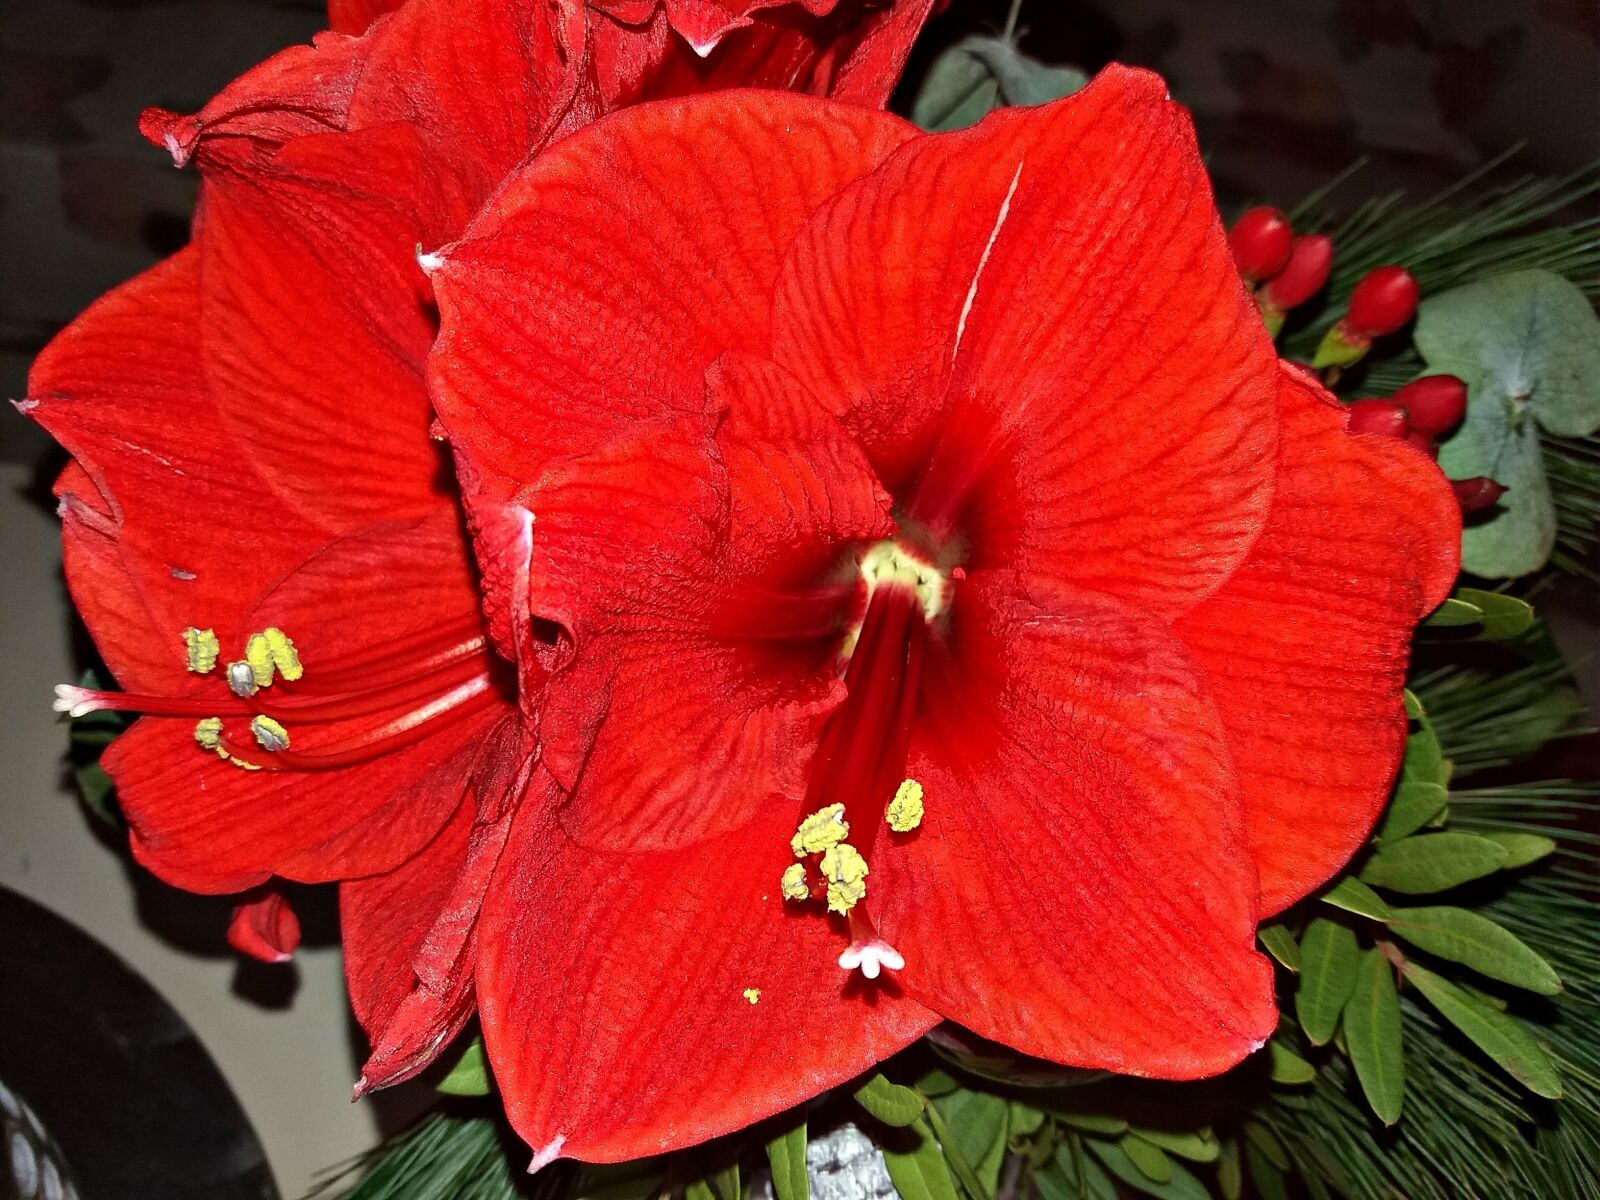 Samsung Galaxy J5 sample photo. Flower, red, nature photography